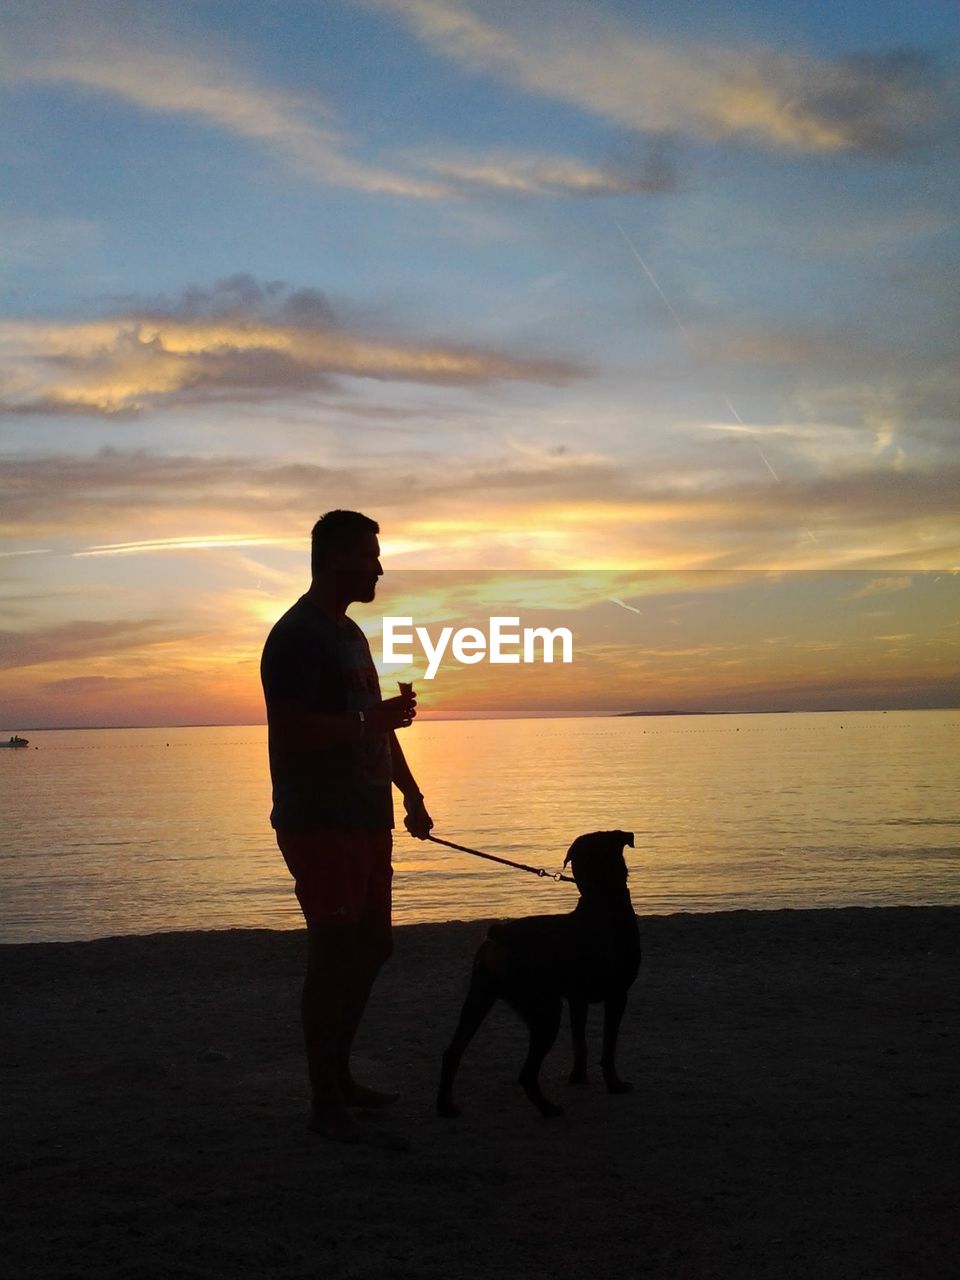 Silhouette of man and dog on beach during sunset